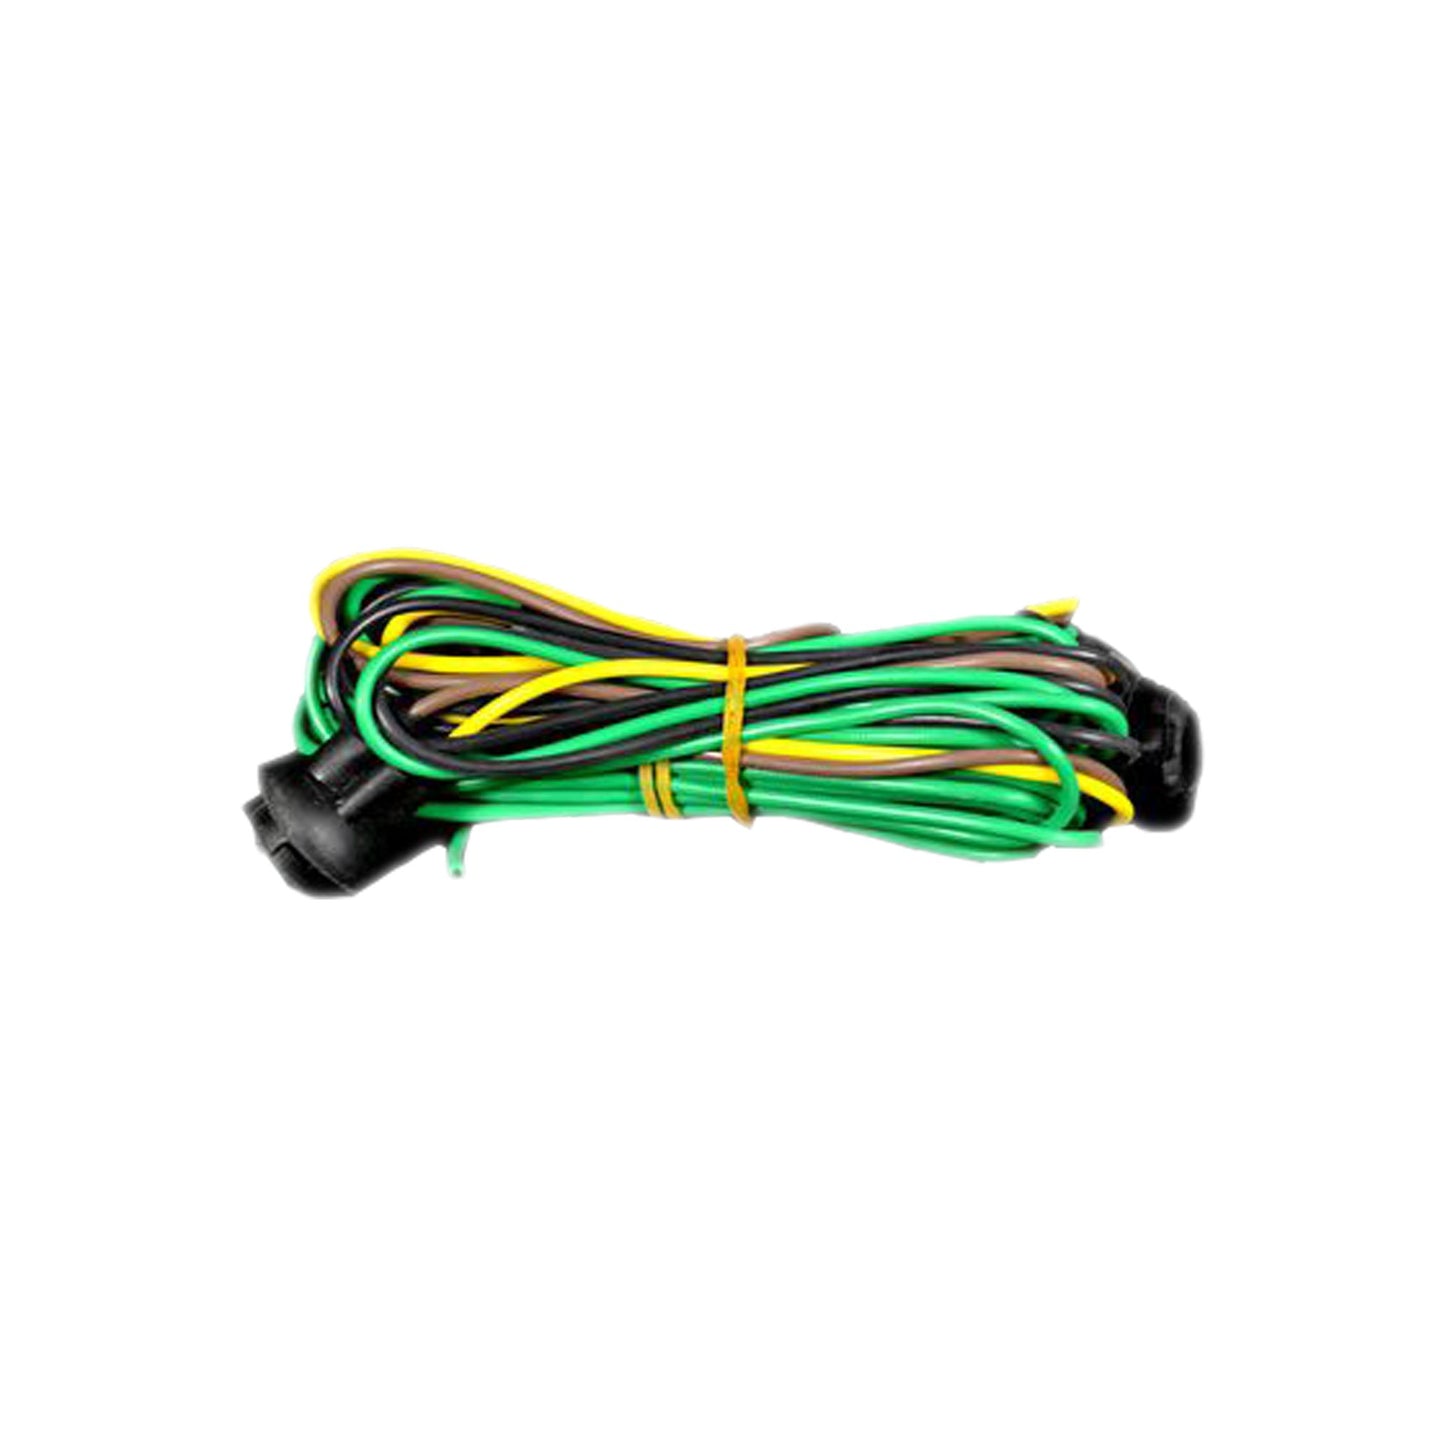 Wiring/Hardware Kit - Used to Install Cab Lights on Vehicle That Didnt Have OEM Cab Lights - GMC SIERRA/Chevy SILVERADO 2007-2014 HD